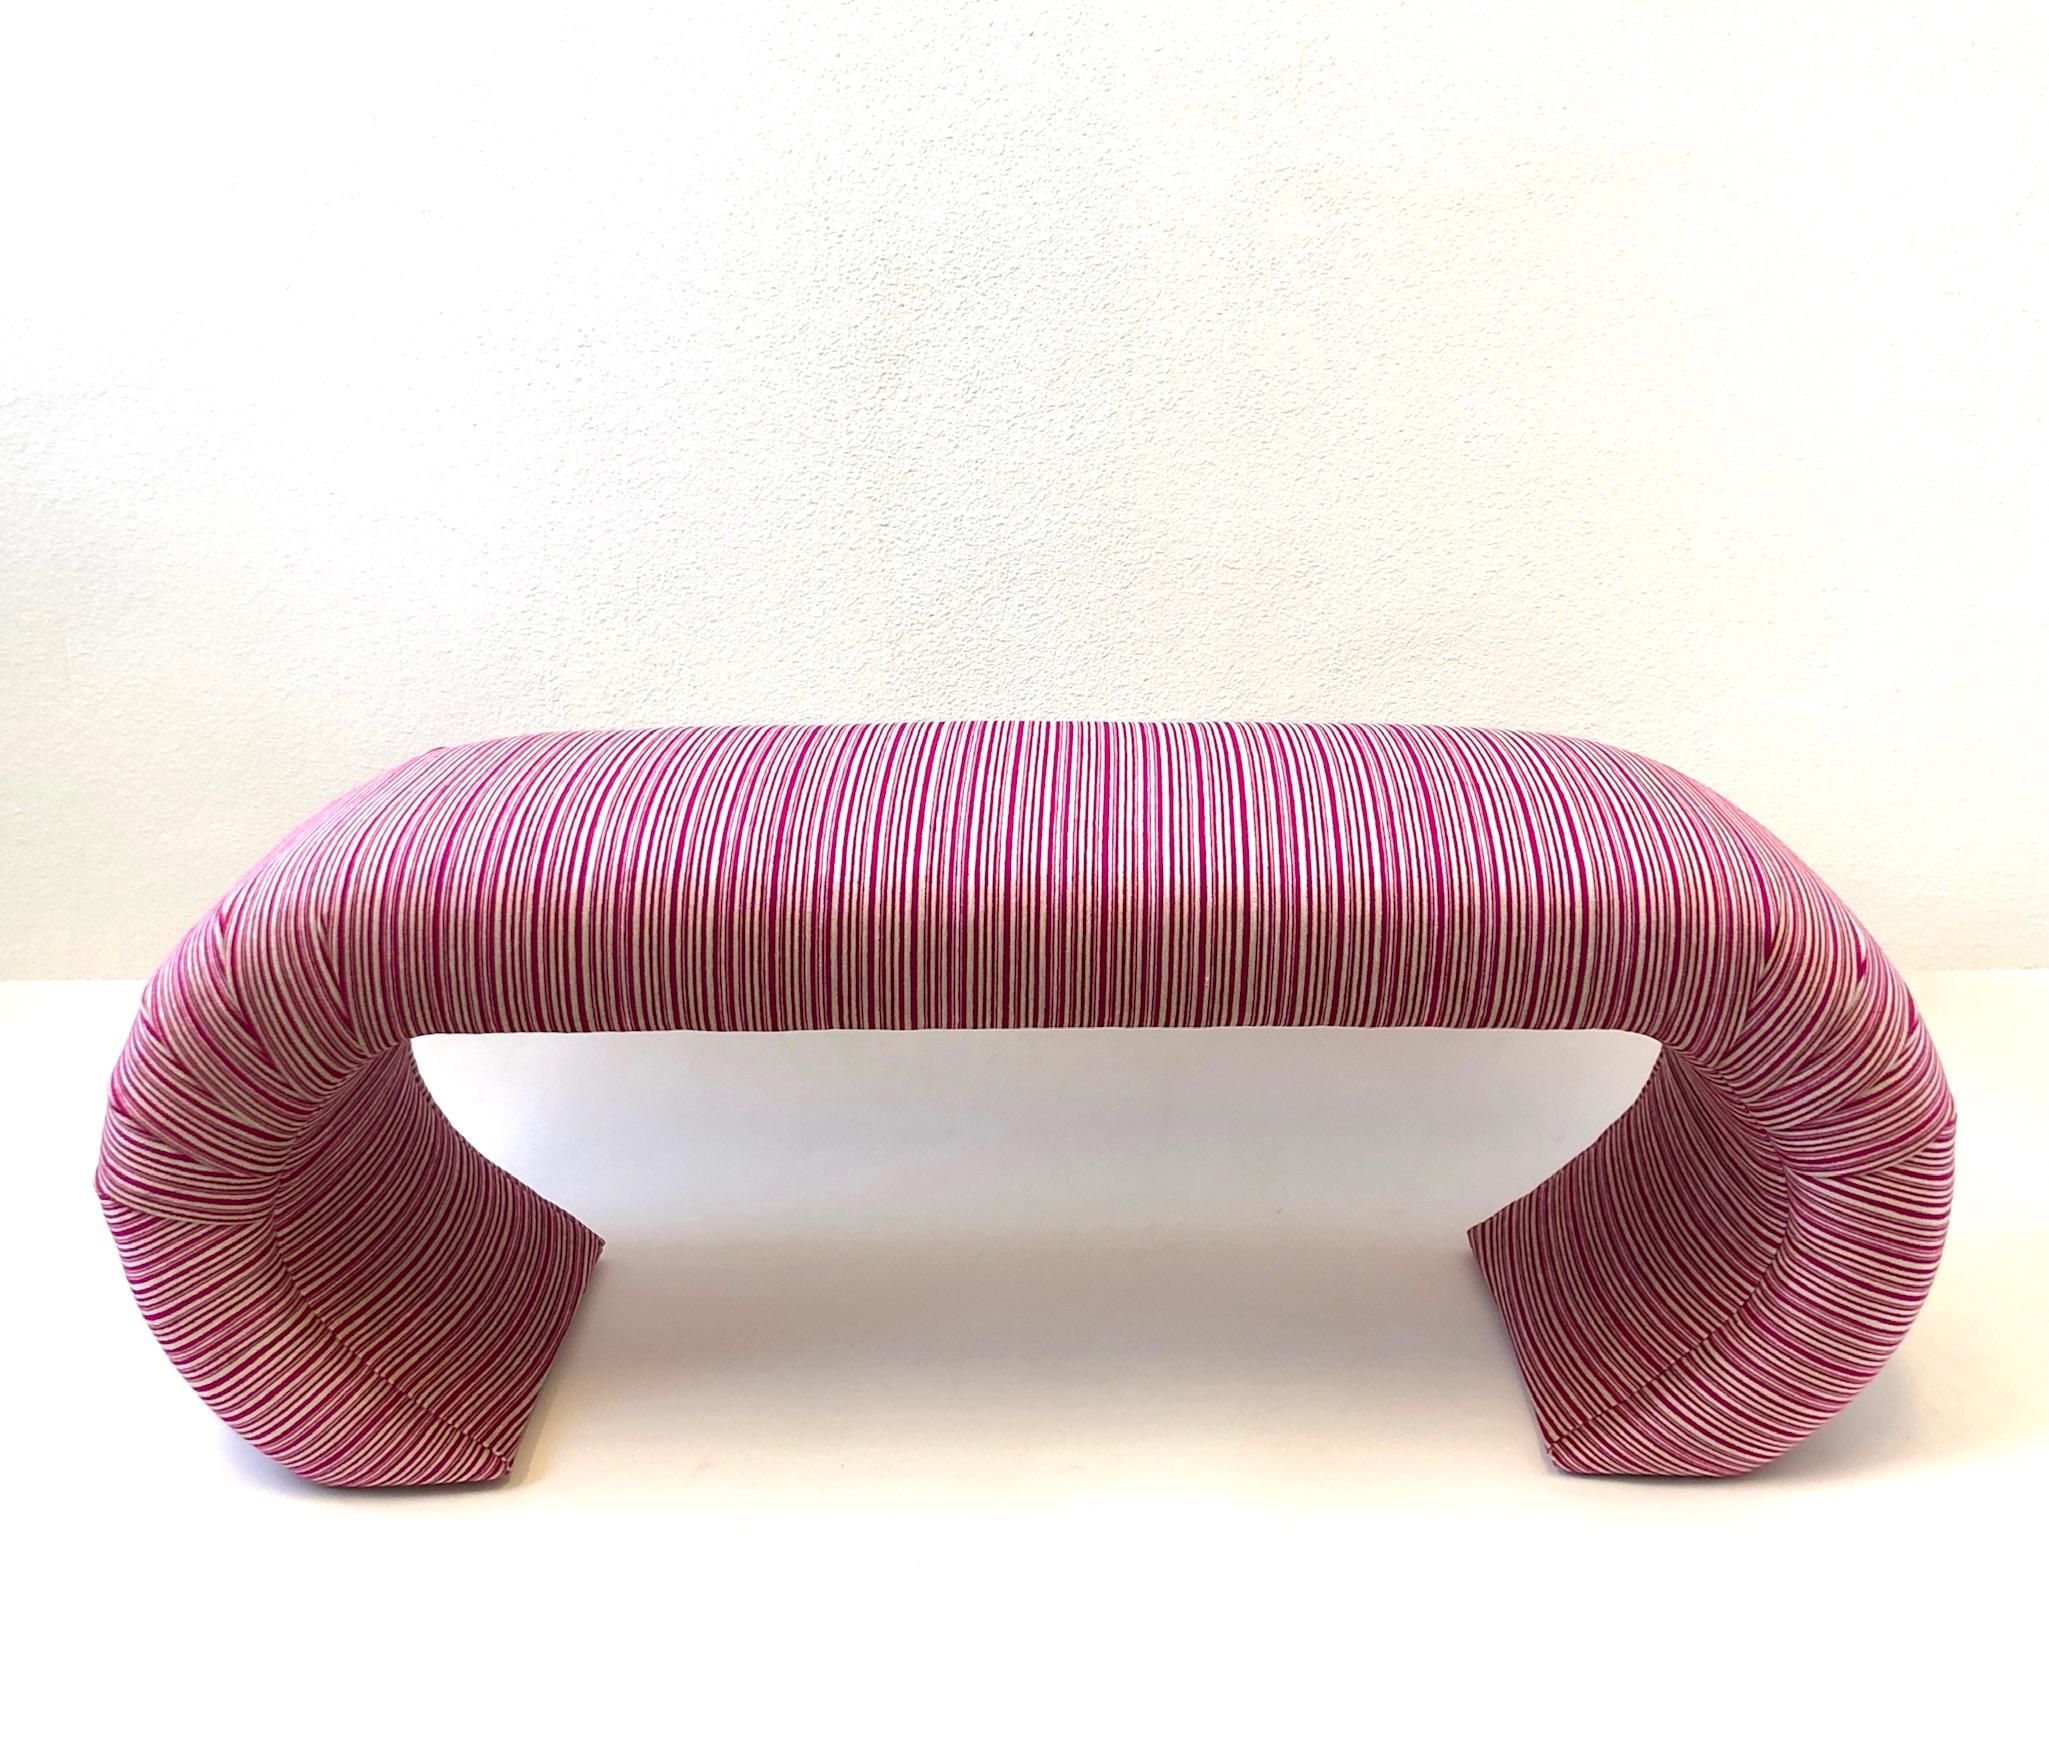 A glamorous 1980s newly upholstered bench by Steve Chase. The bench has been upholstered in a fuchsia and off-white striped soft velvet fabric.
Measurements: 57” wide, 19”deep and 21.5” high.